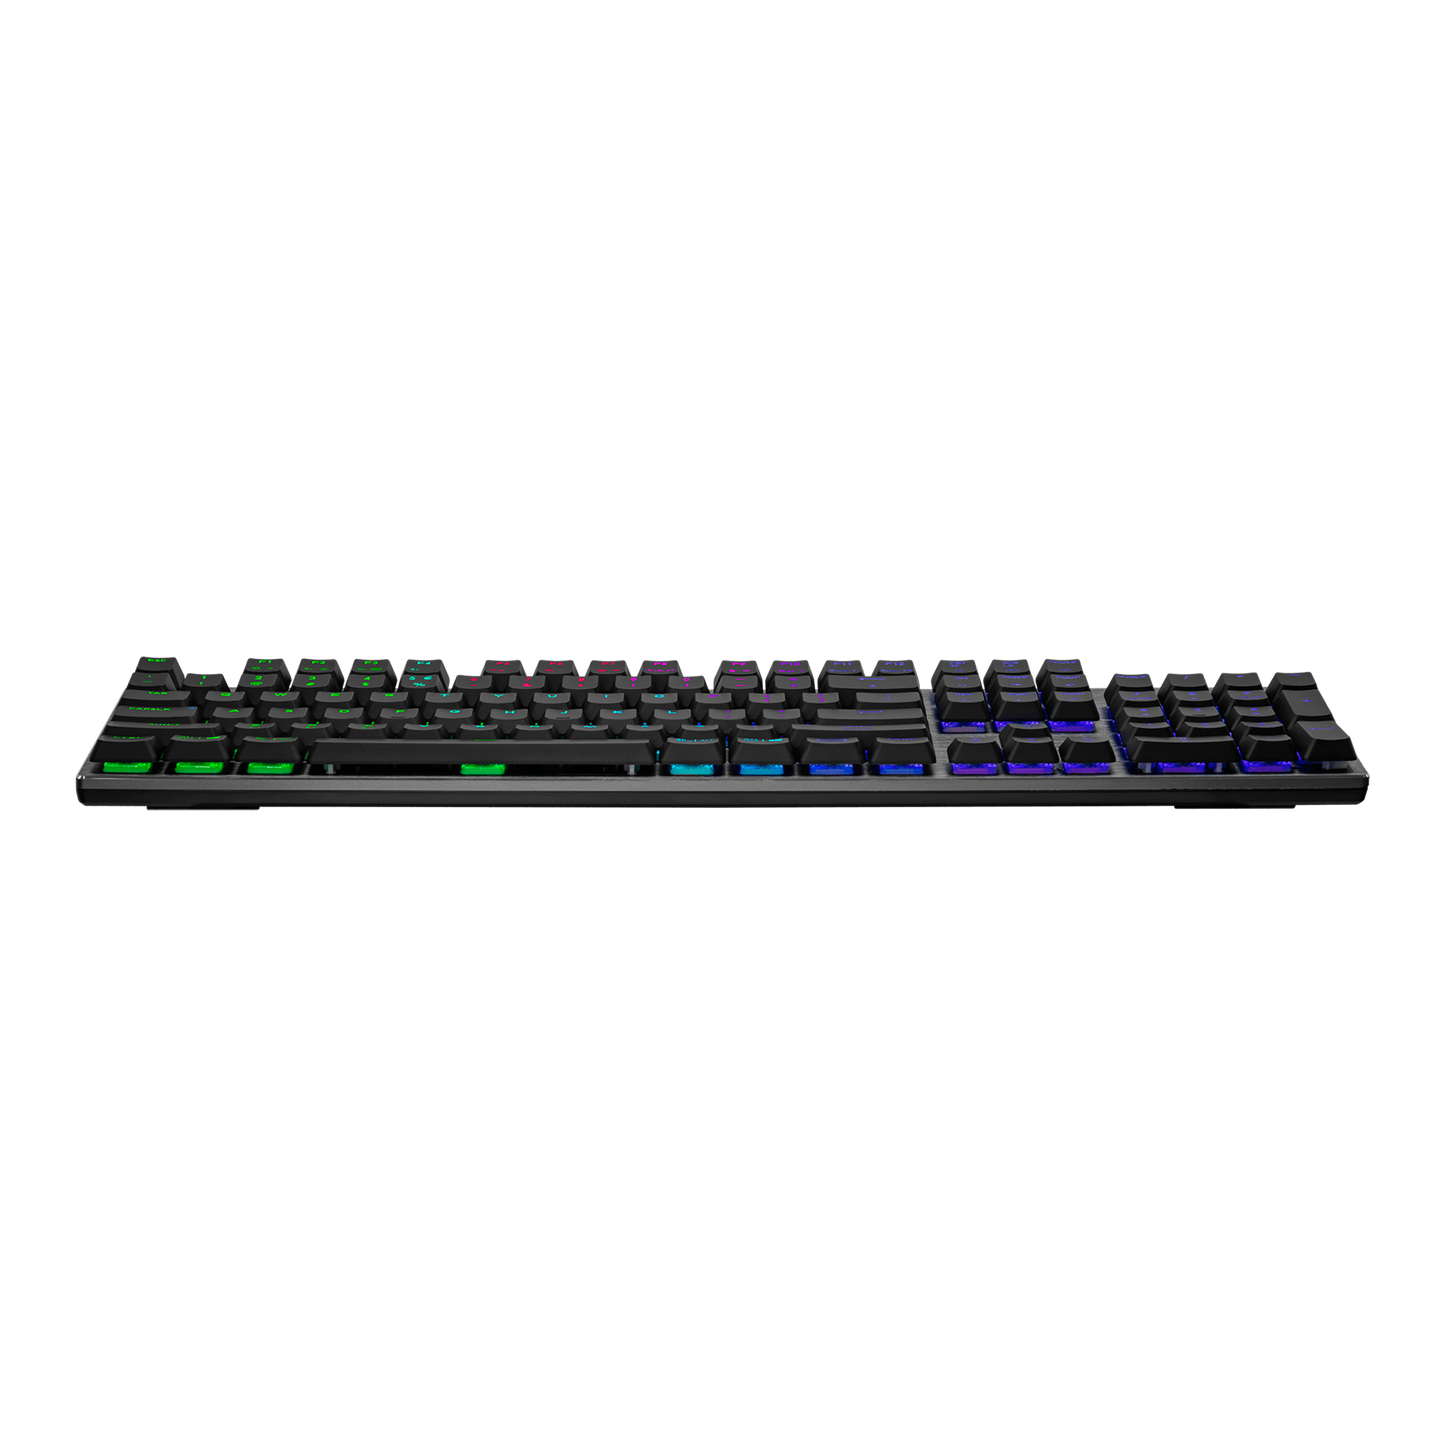 Cooler Master SK653 - Wireless Mechanical Keyboard RGB - TTC Red Low Profile Switch - US QWERTY